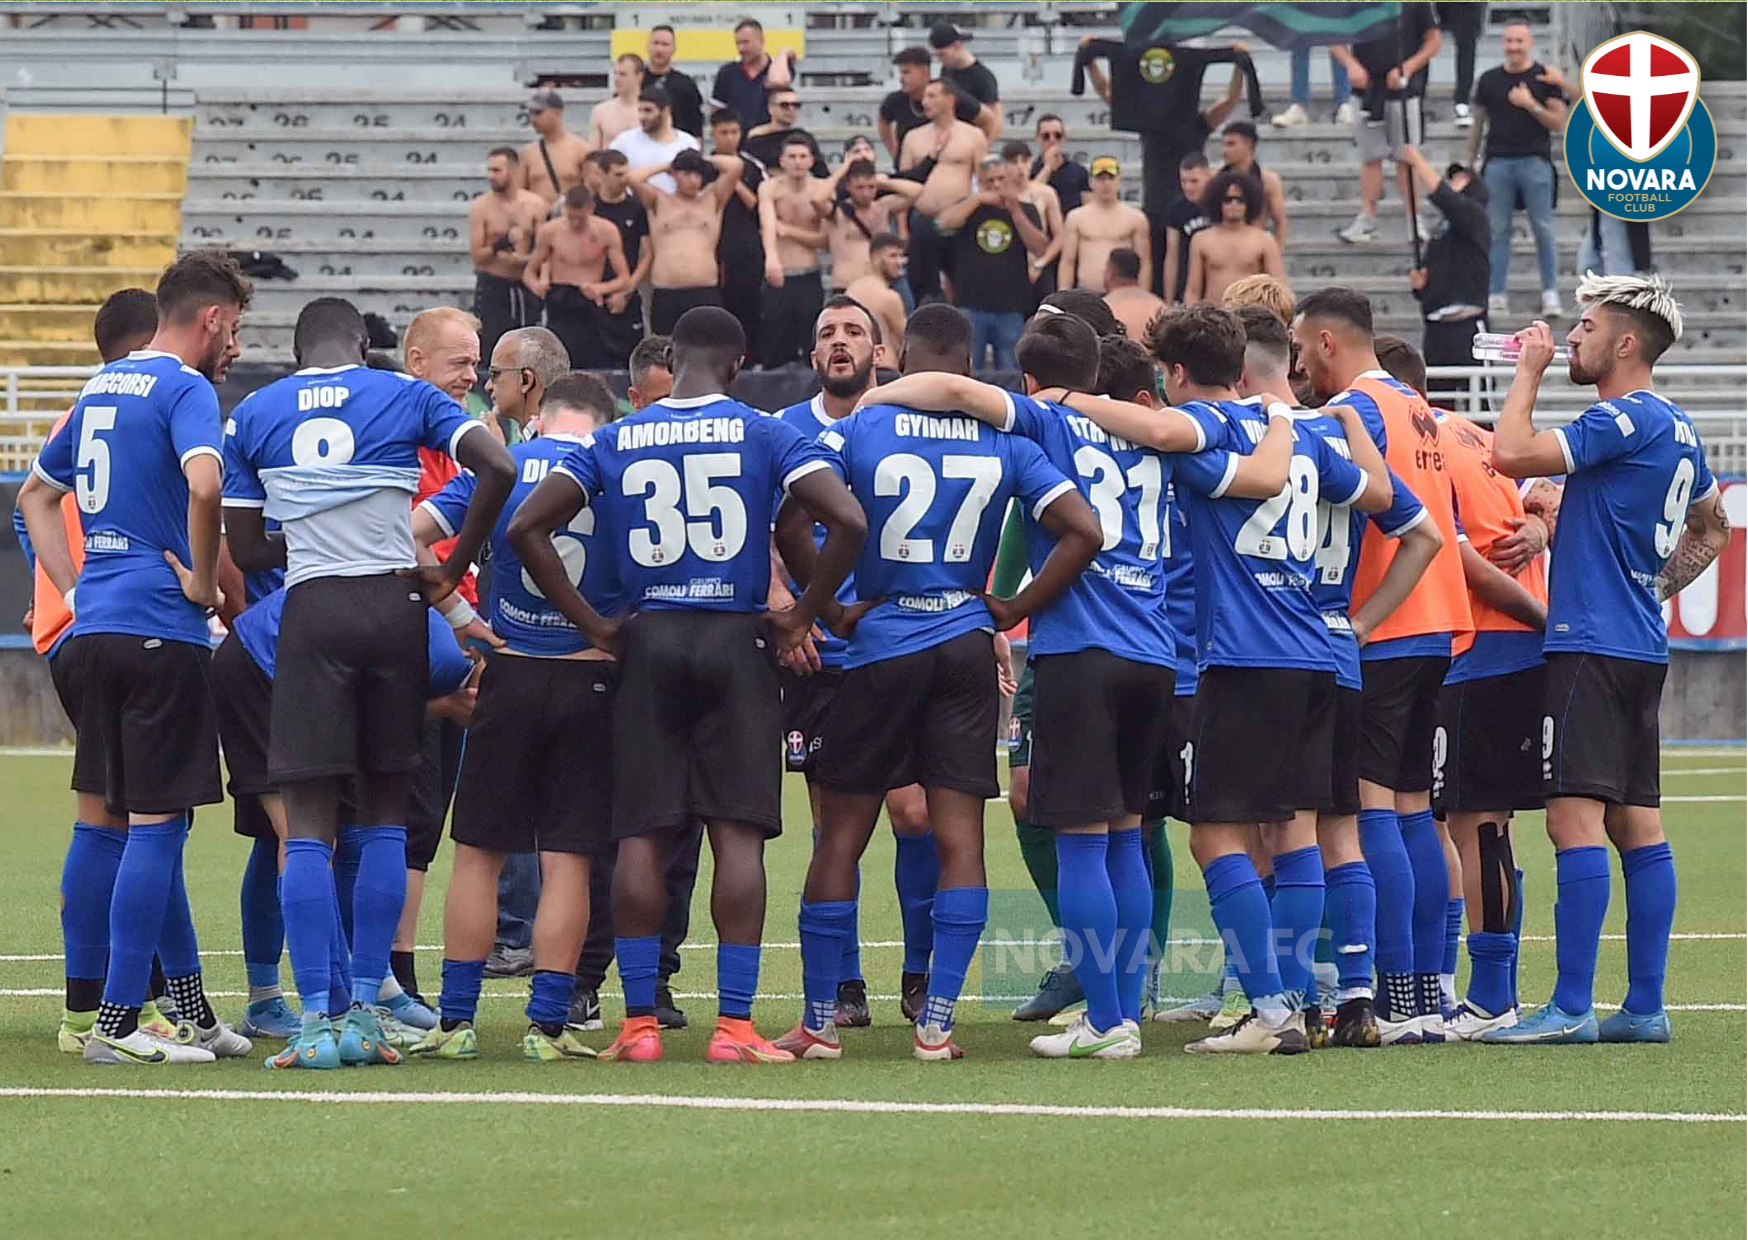 Read more about the article Novara-Sangiuliano City 0-1 | Gallery